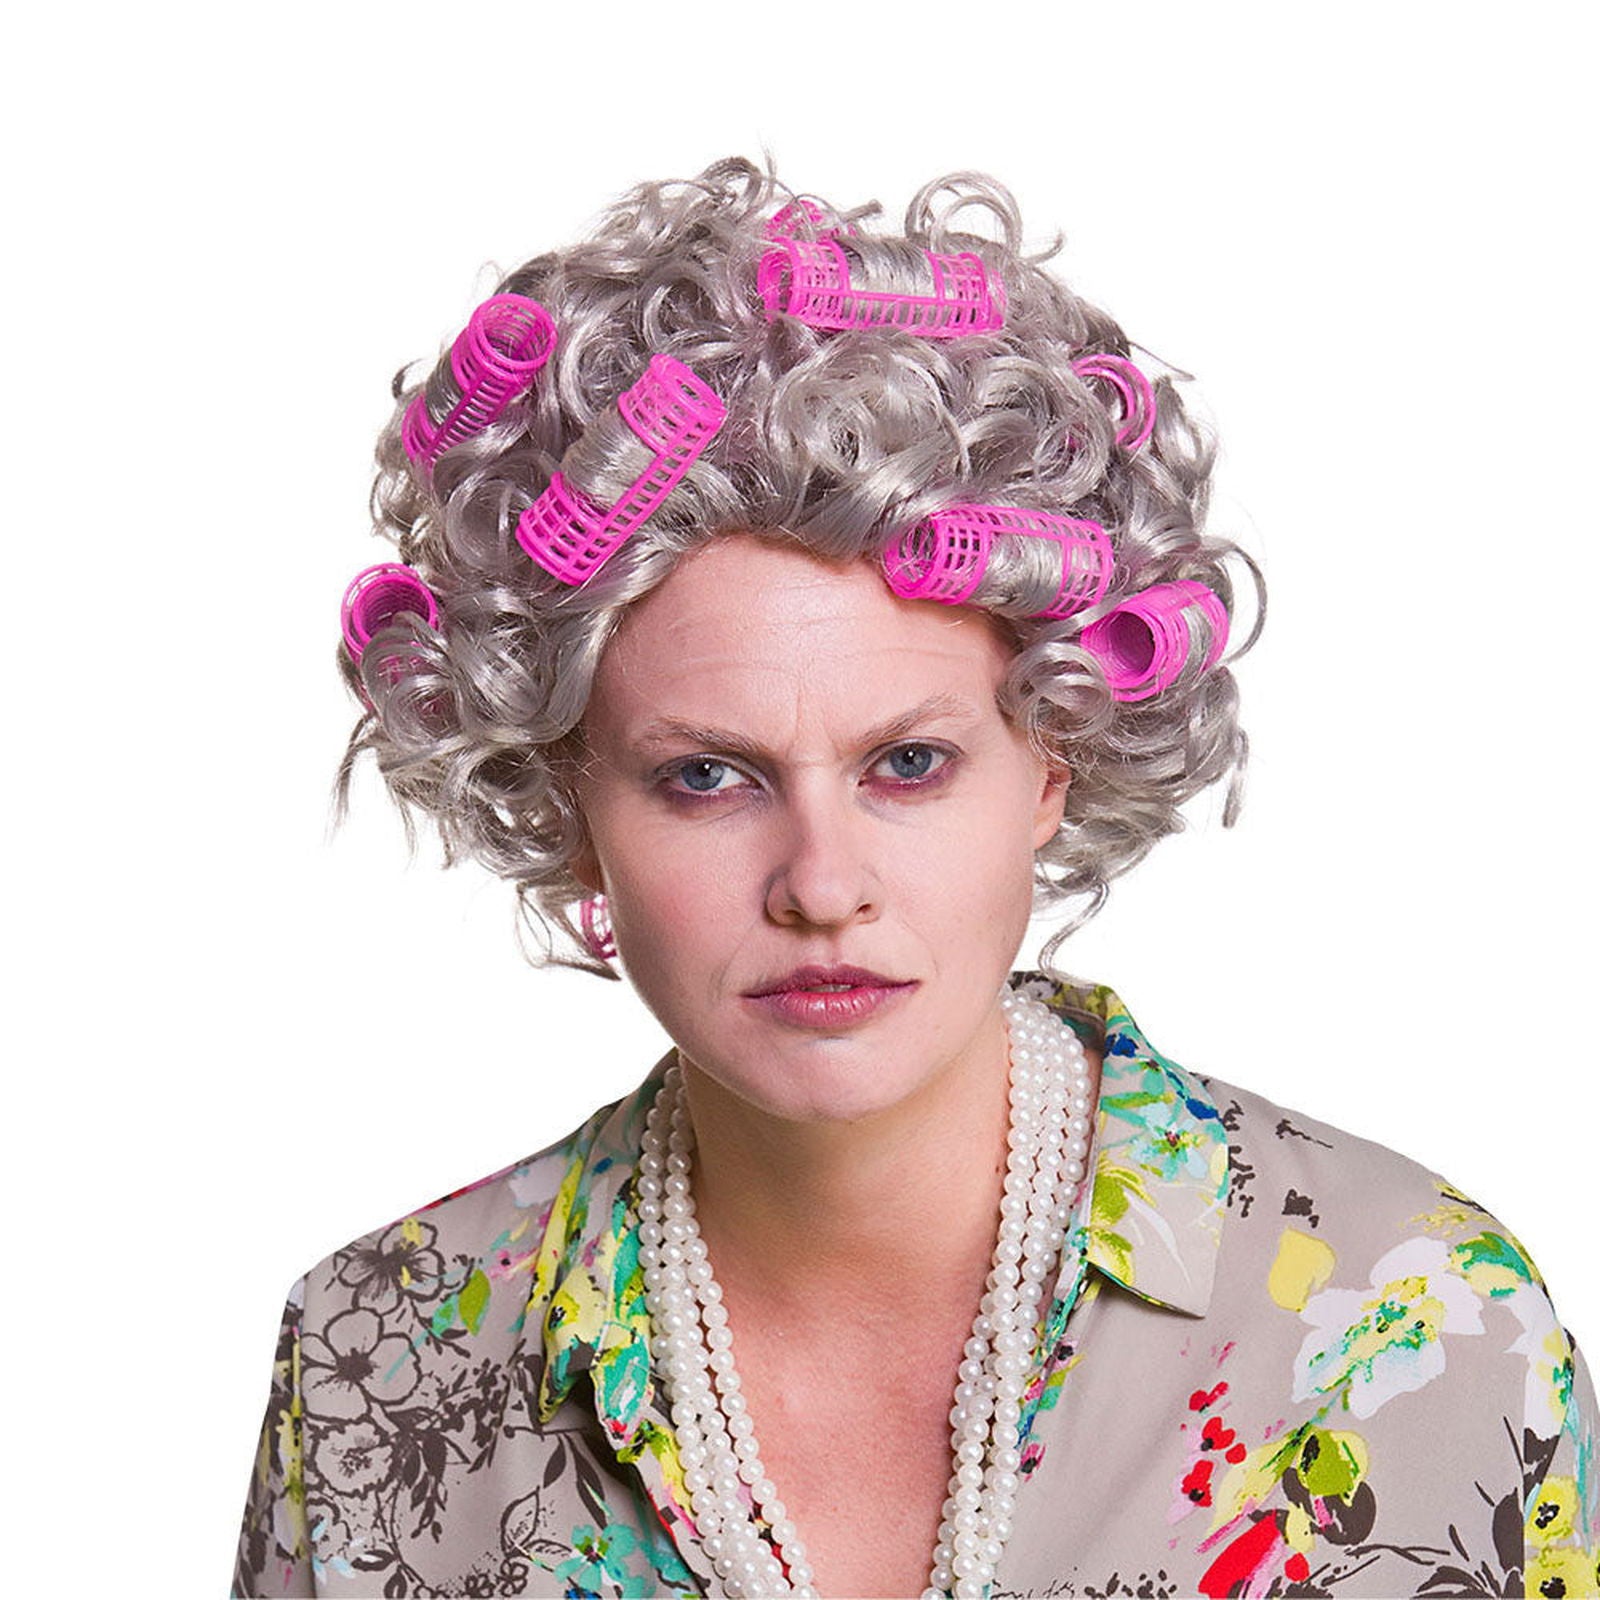 OAP Granny Grey Curly Fancy Dress Wig With Pink Hair Rollers | Merthyr Tydfil | Why Not Shop Online